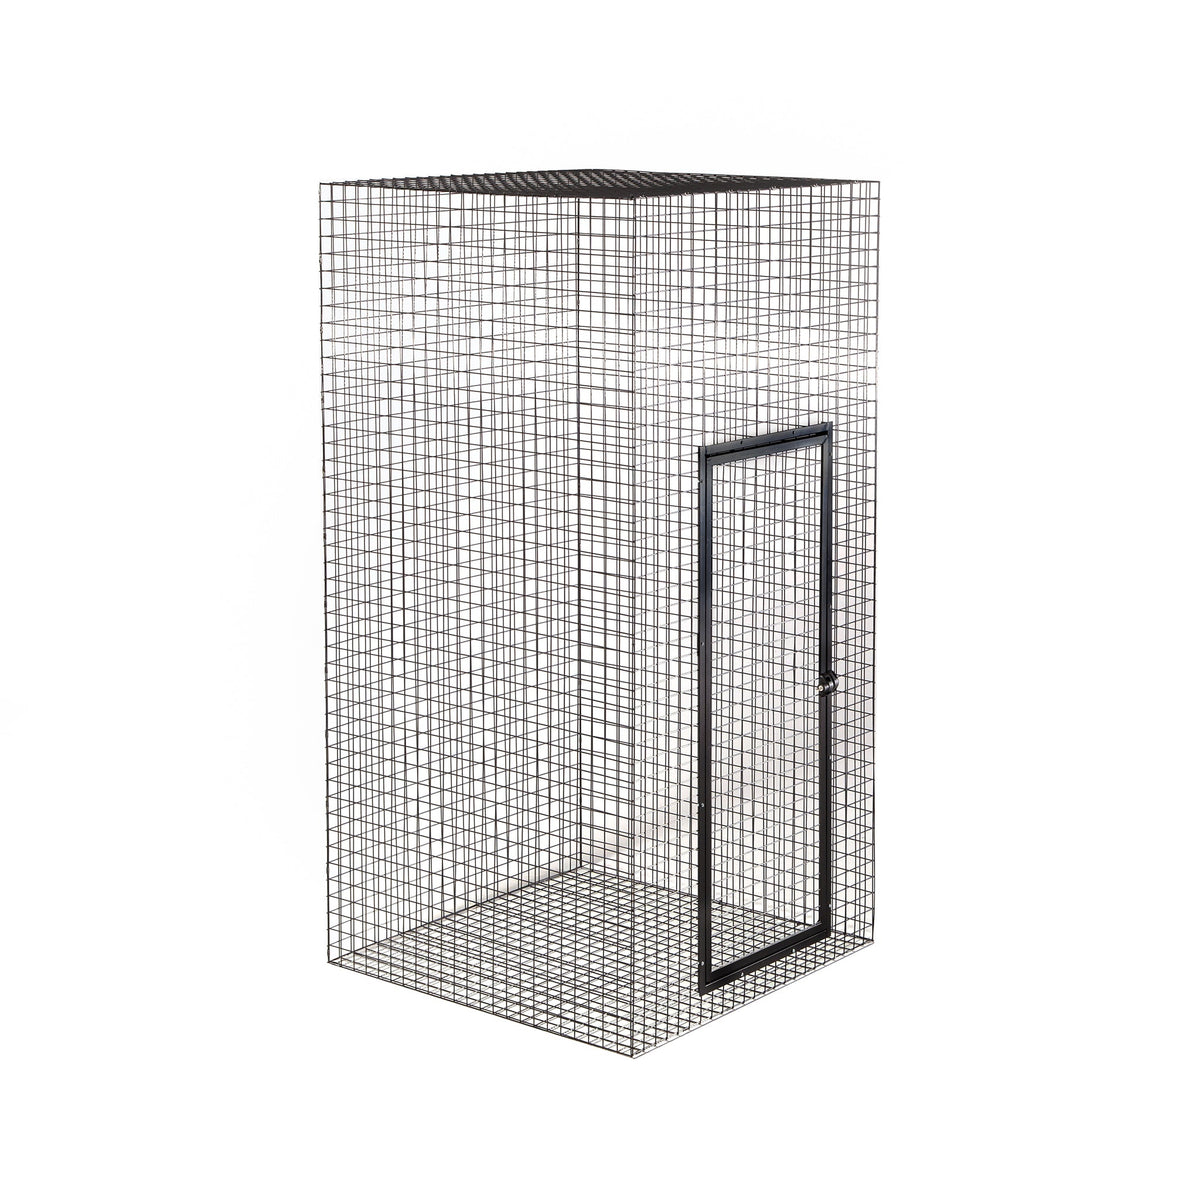 Four Sided Enclosure - With Wire Mesh Floor - Habitat Haven